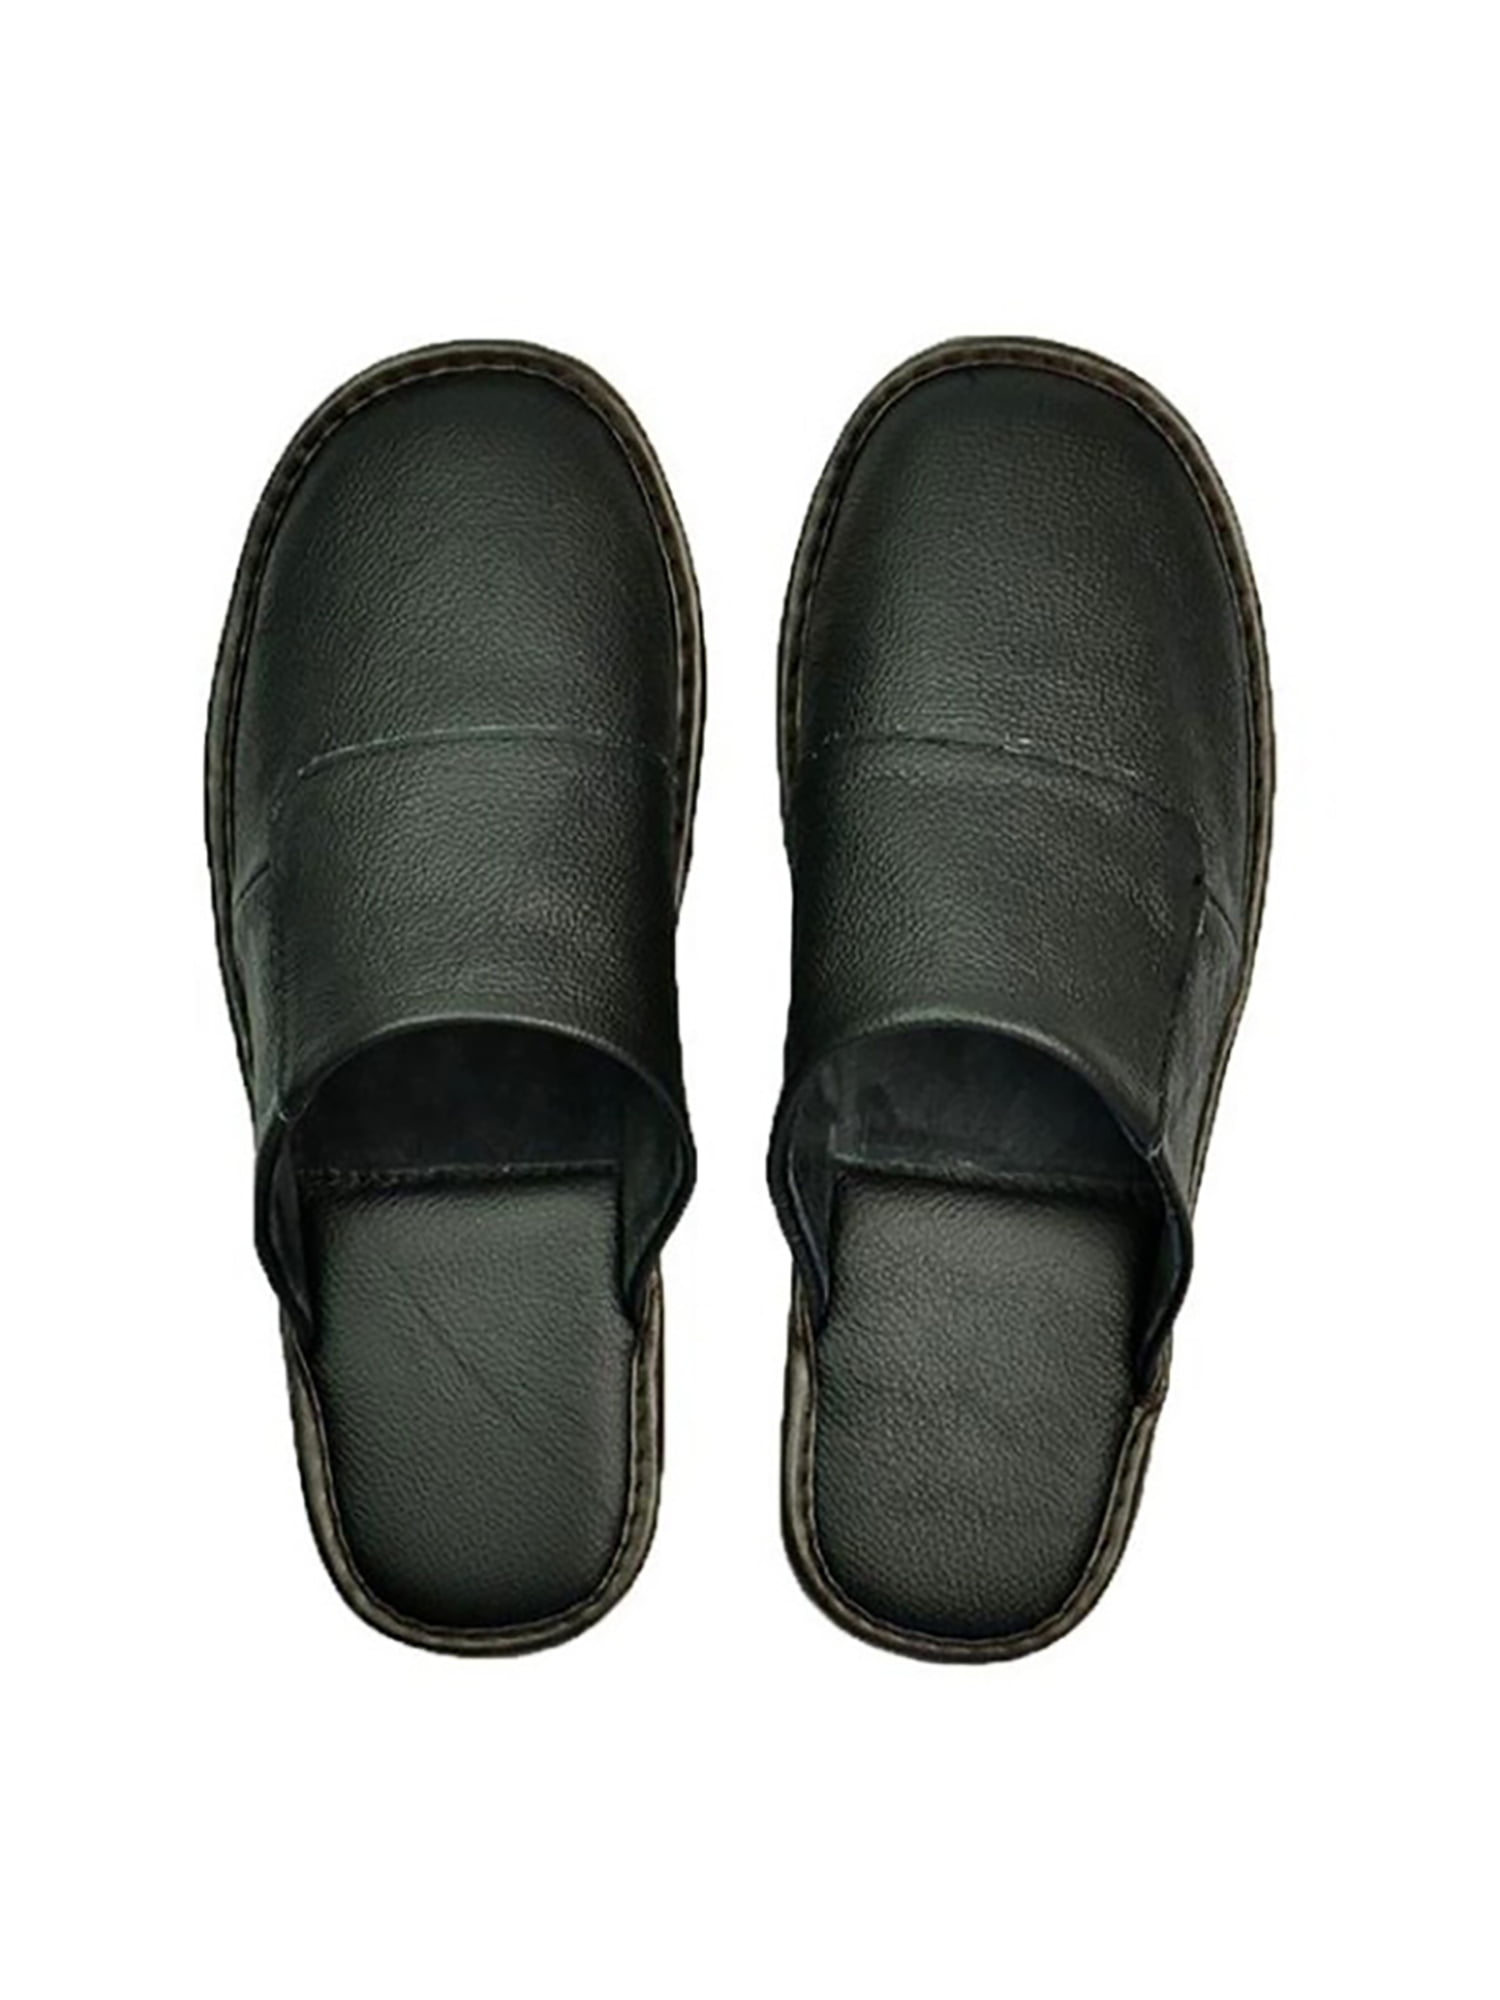 Mens Leather Slippers Beach Shoes Comfort Sandals Slip On Mules Black Size 6-11